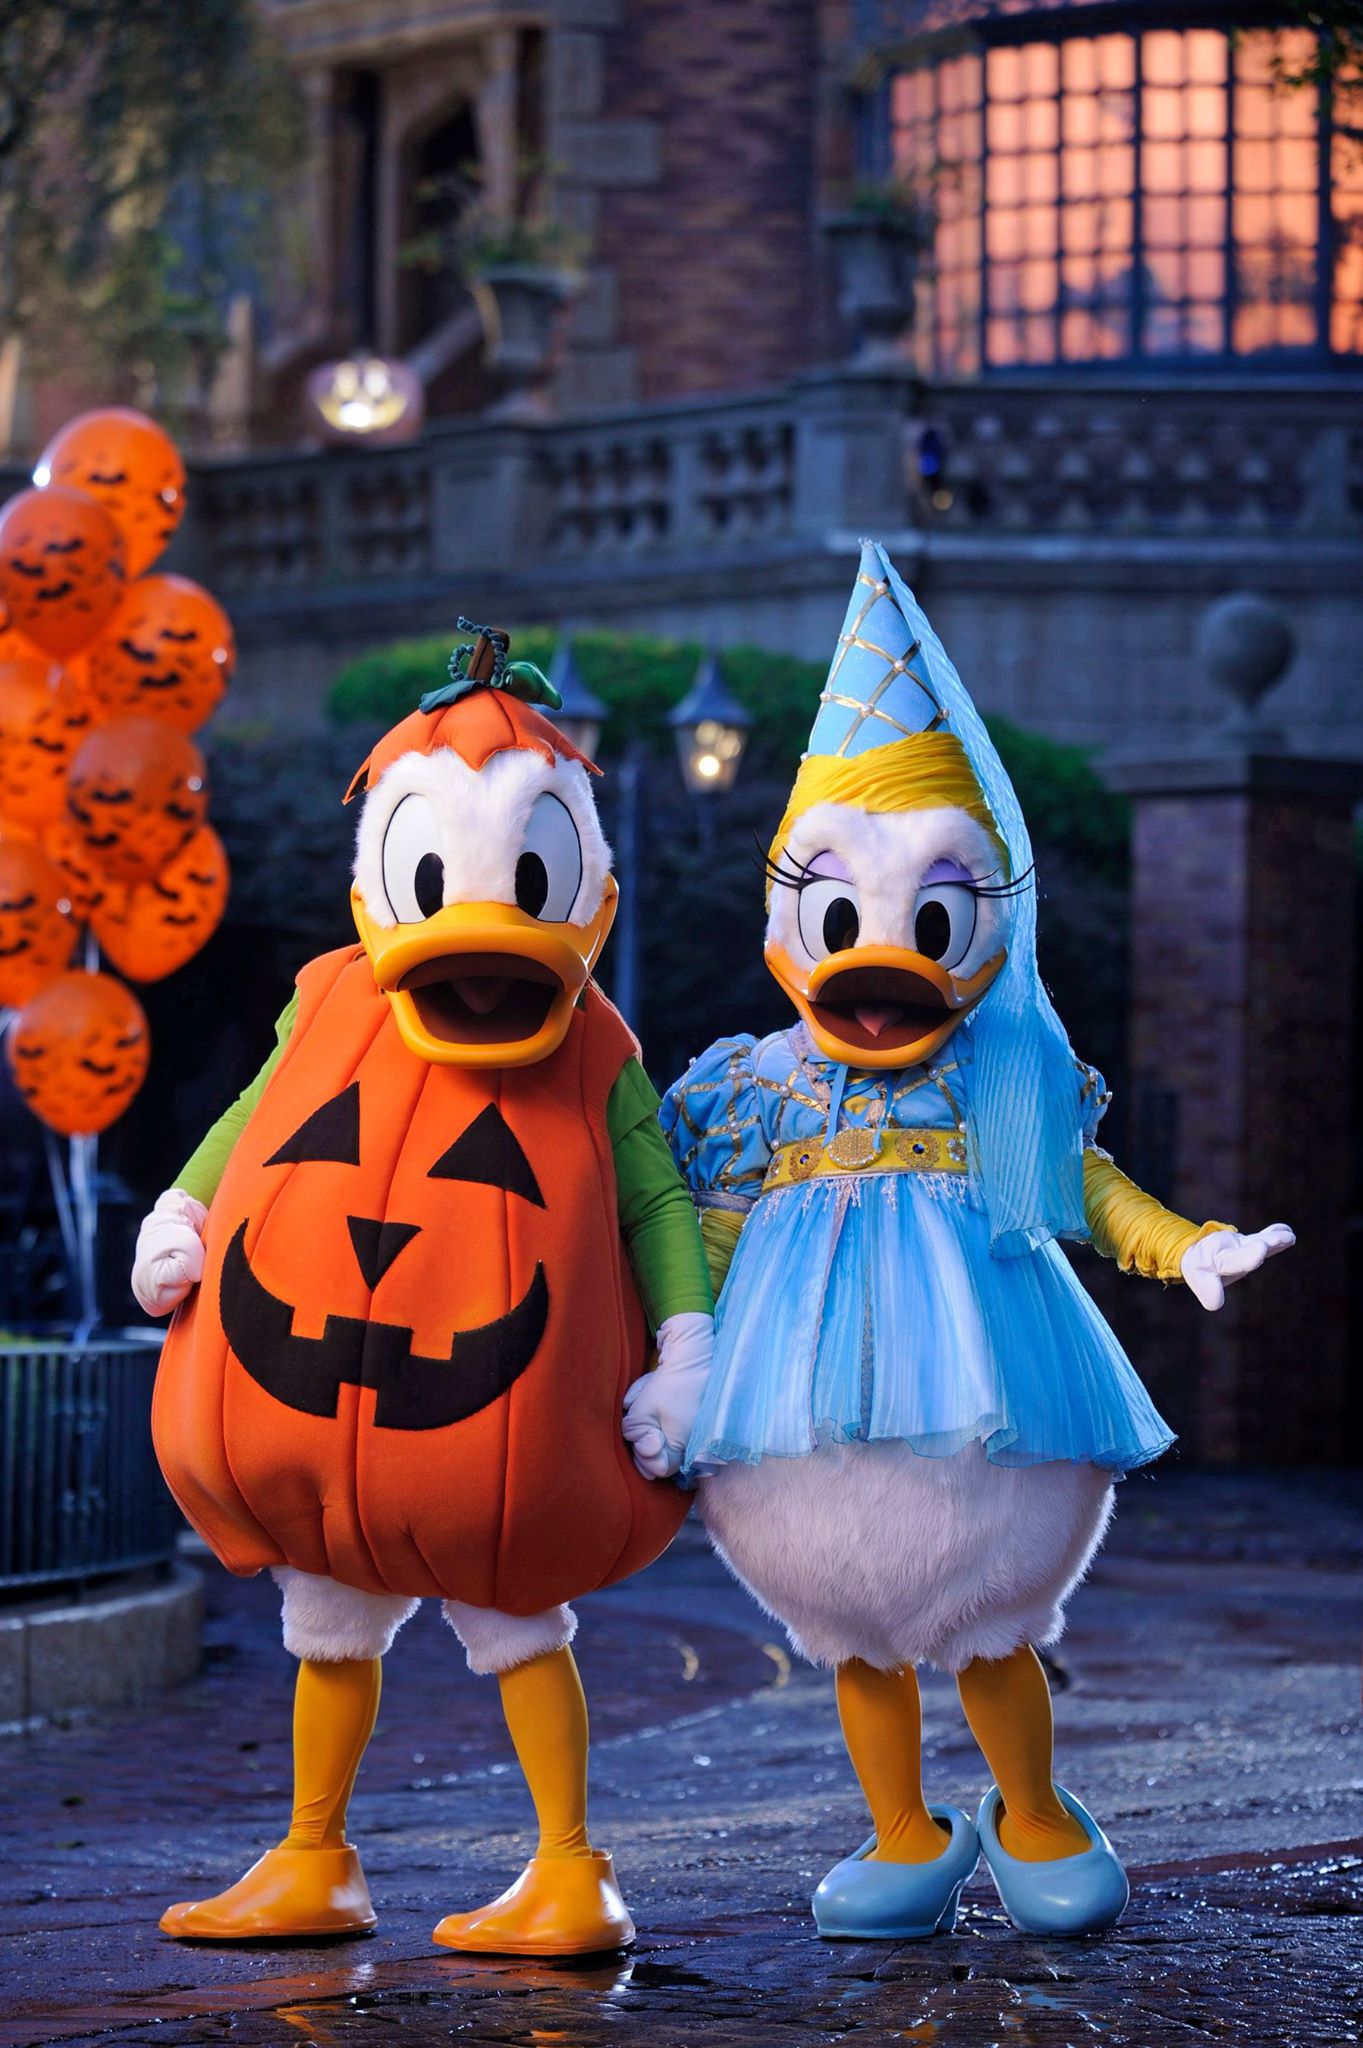 Where to Find Your Favorite Characters at Mickey’s Not So Scary Halloween Party